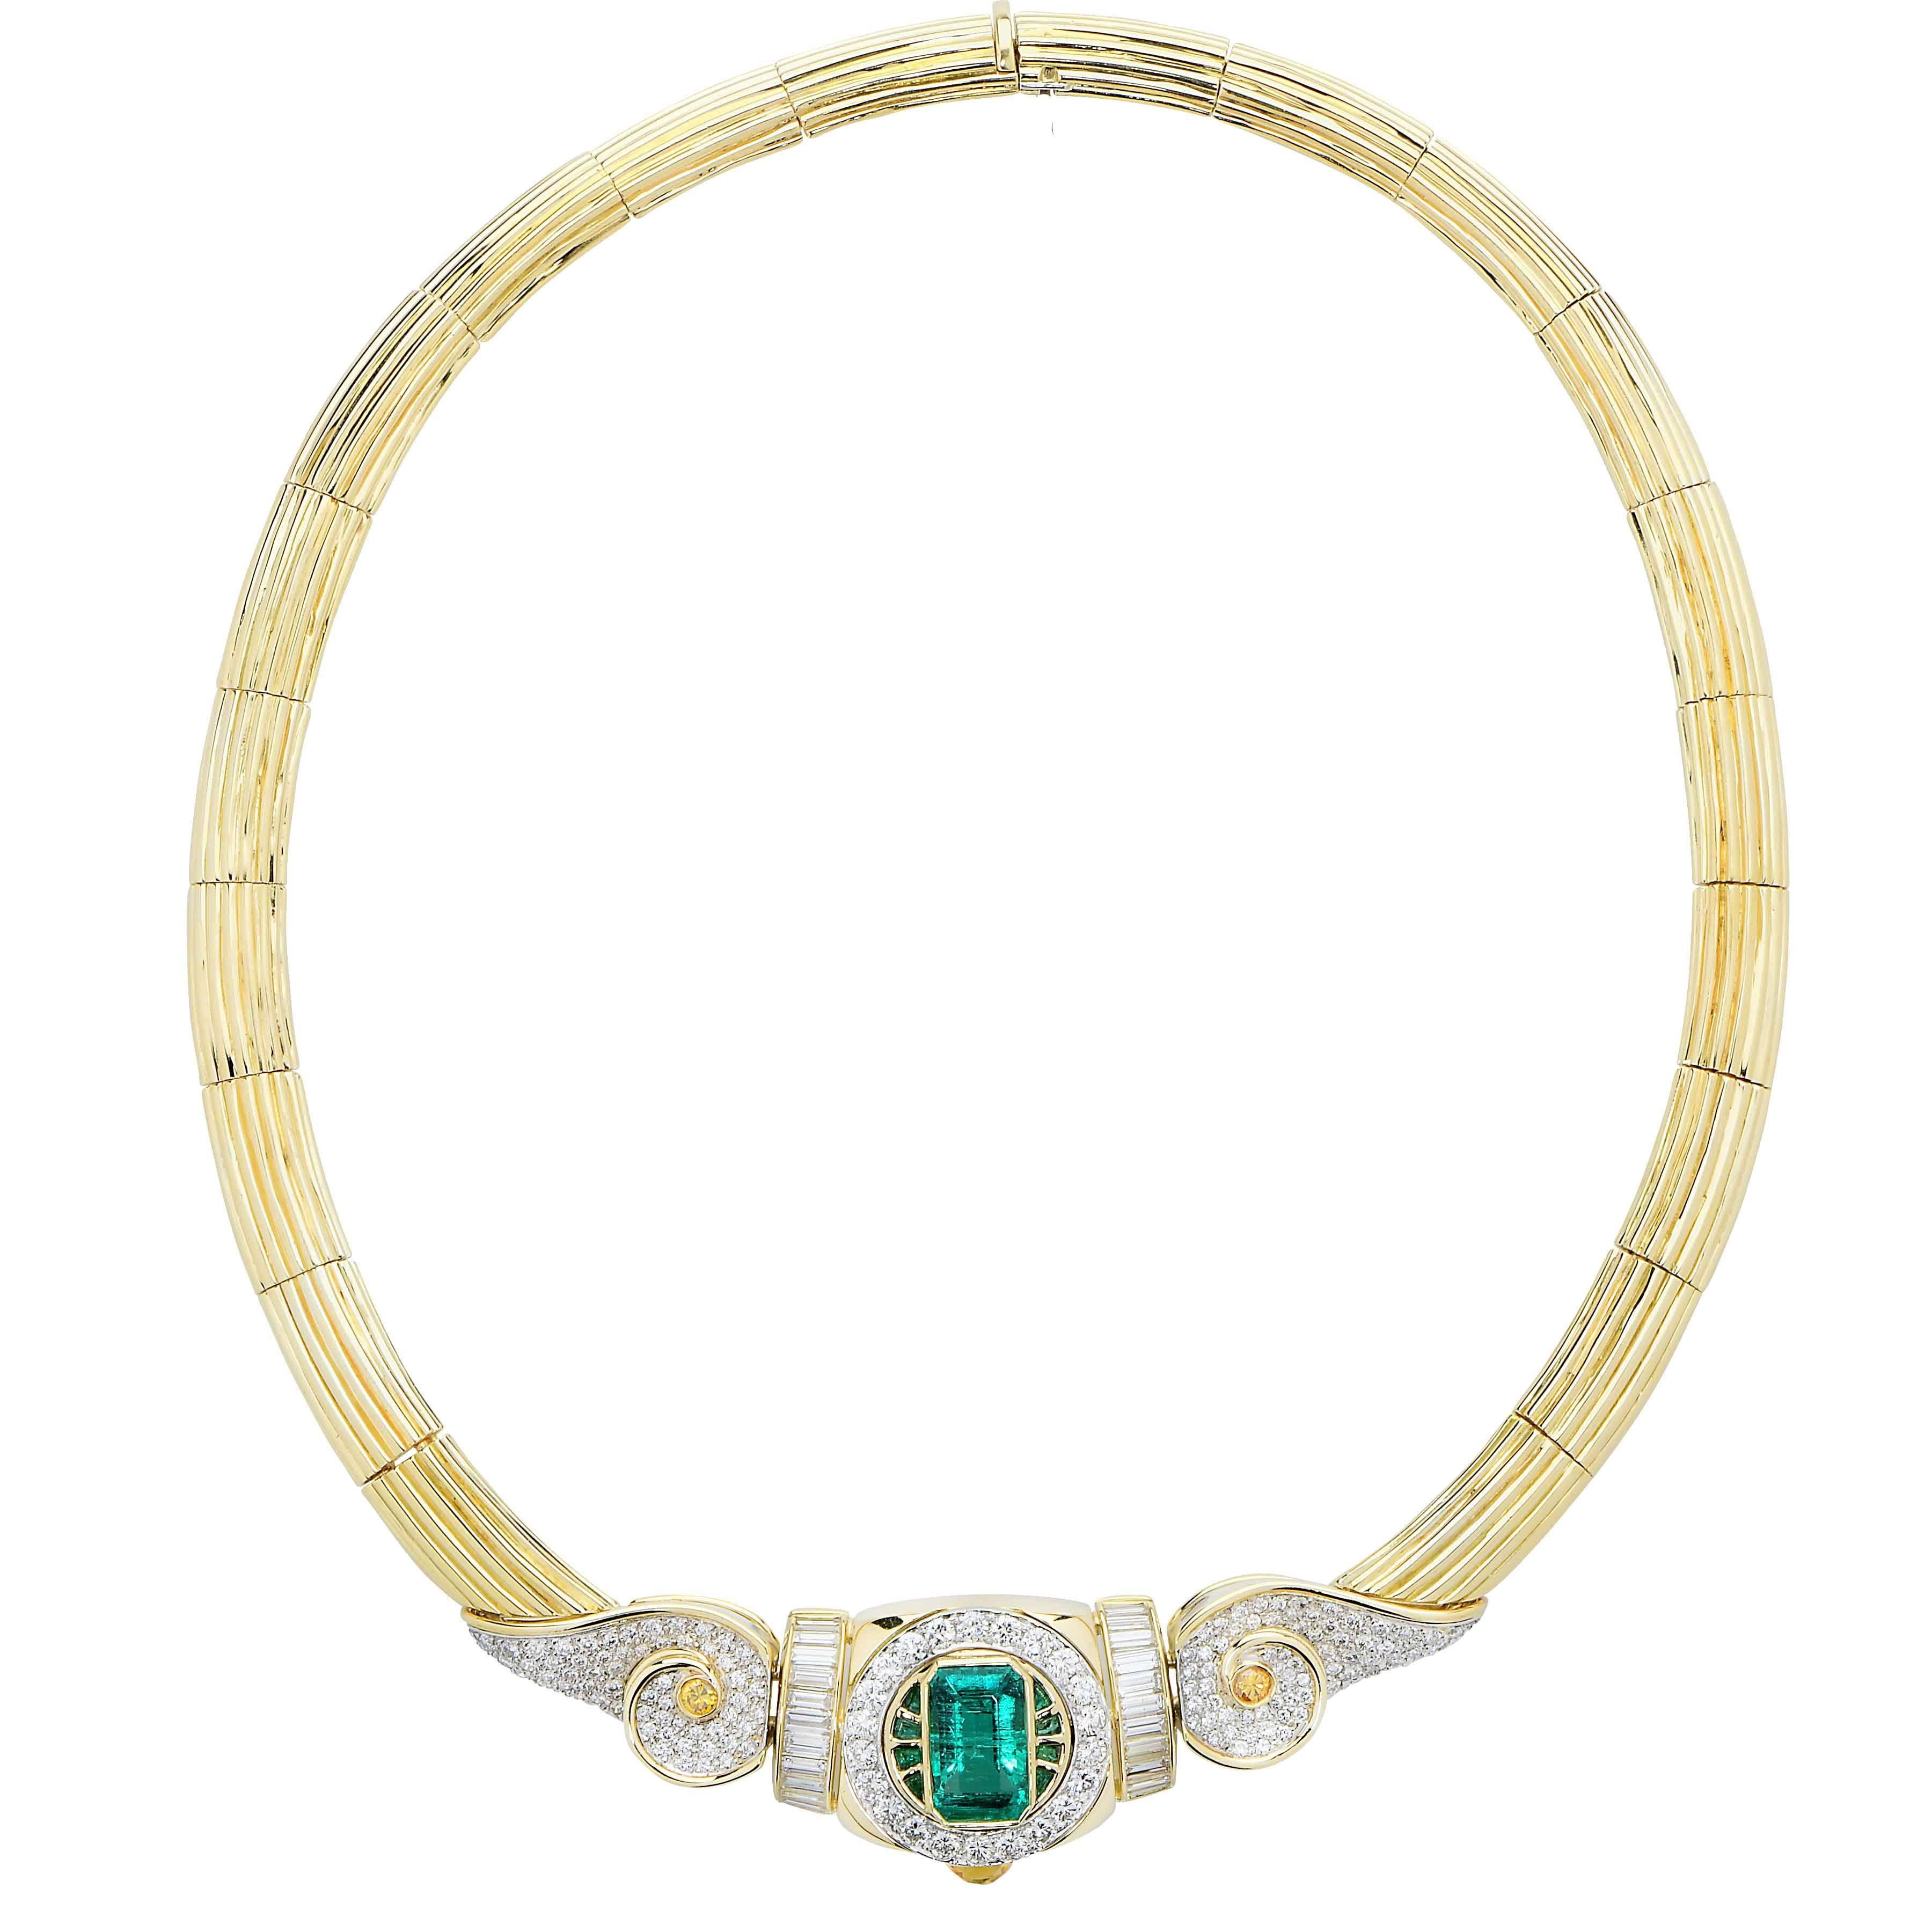 Emerald and diamond necklace featuring an AGL graded Colombian emerald with minor clarity enhancement estimated weight 4.4 carats and  218 mix cut diamonds with an estimated total weight of 5 carats.
Necklace Length 14.5 inches
Metal Type: 18 Kt